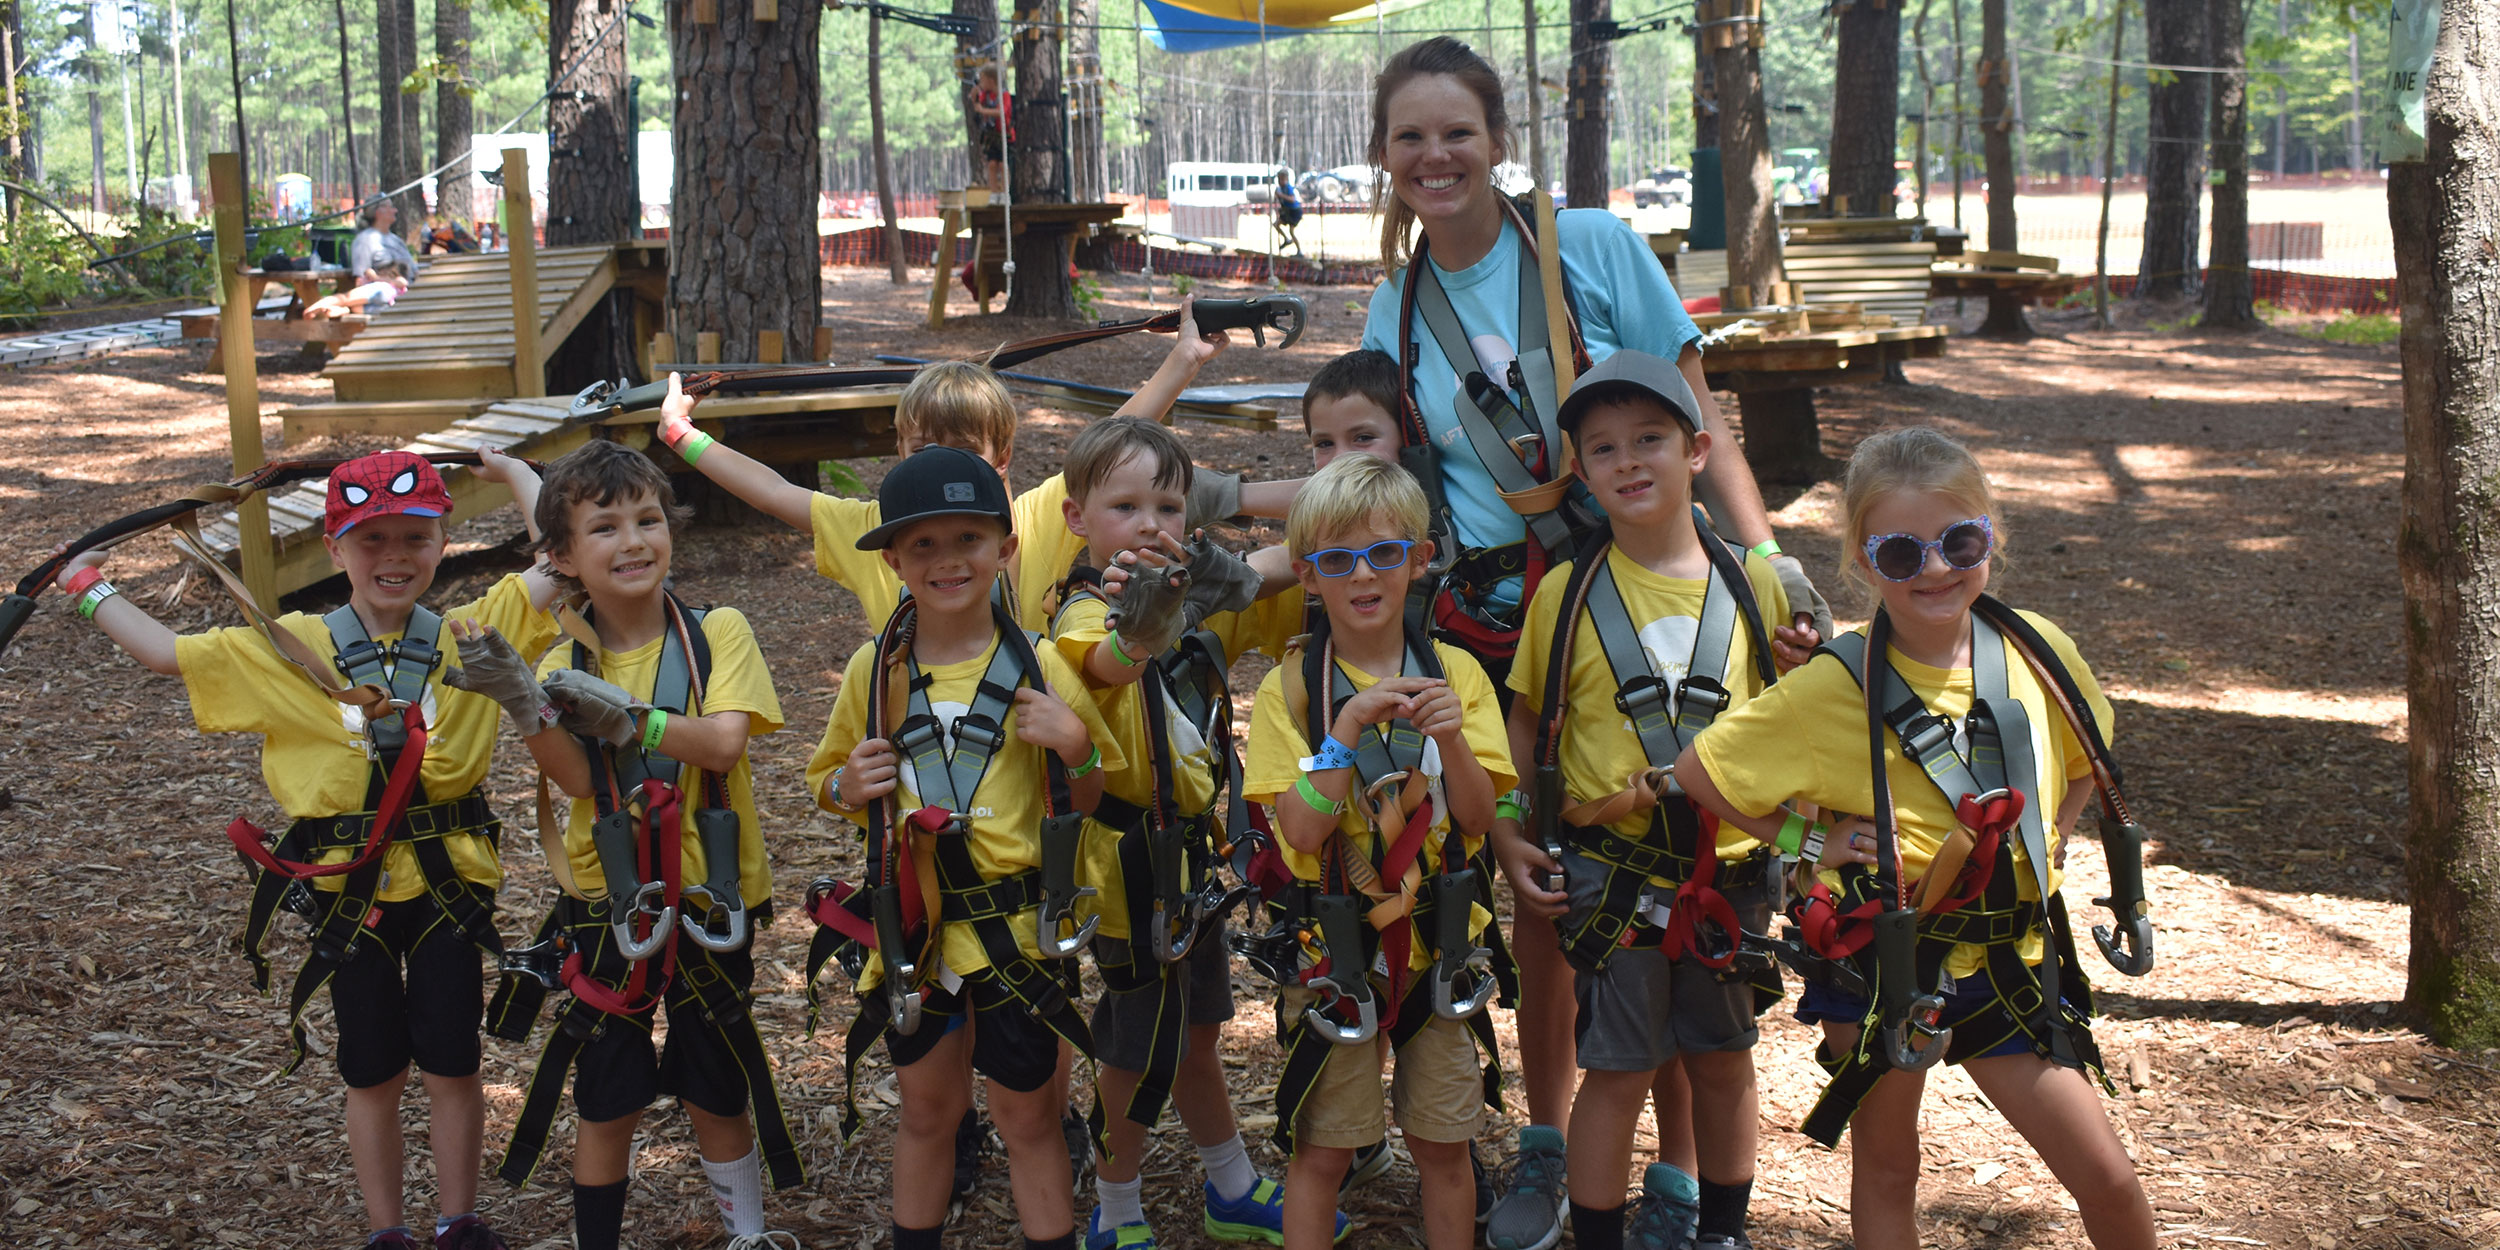 Group of young children in climbing gear with an instructor at an outdoor rock climbing and tree park in Wake County